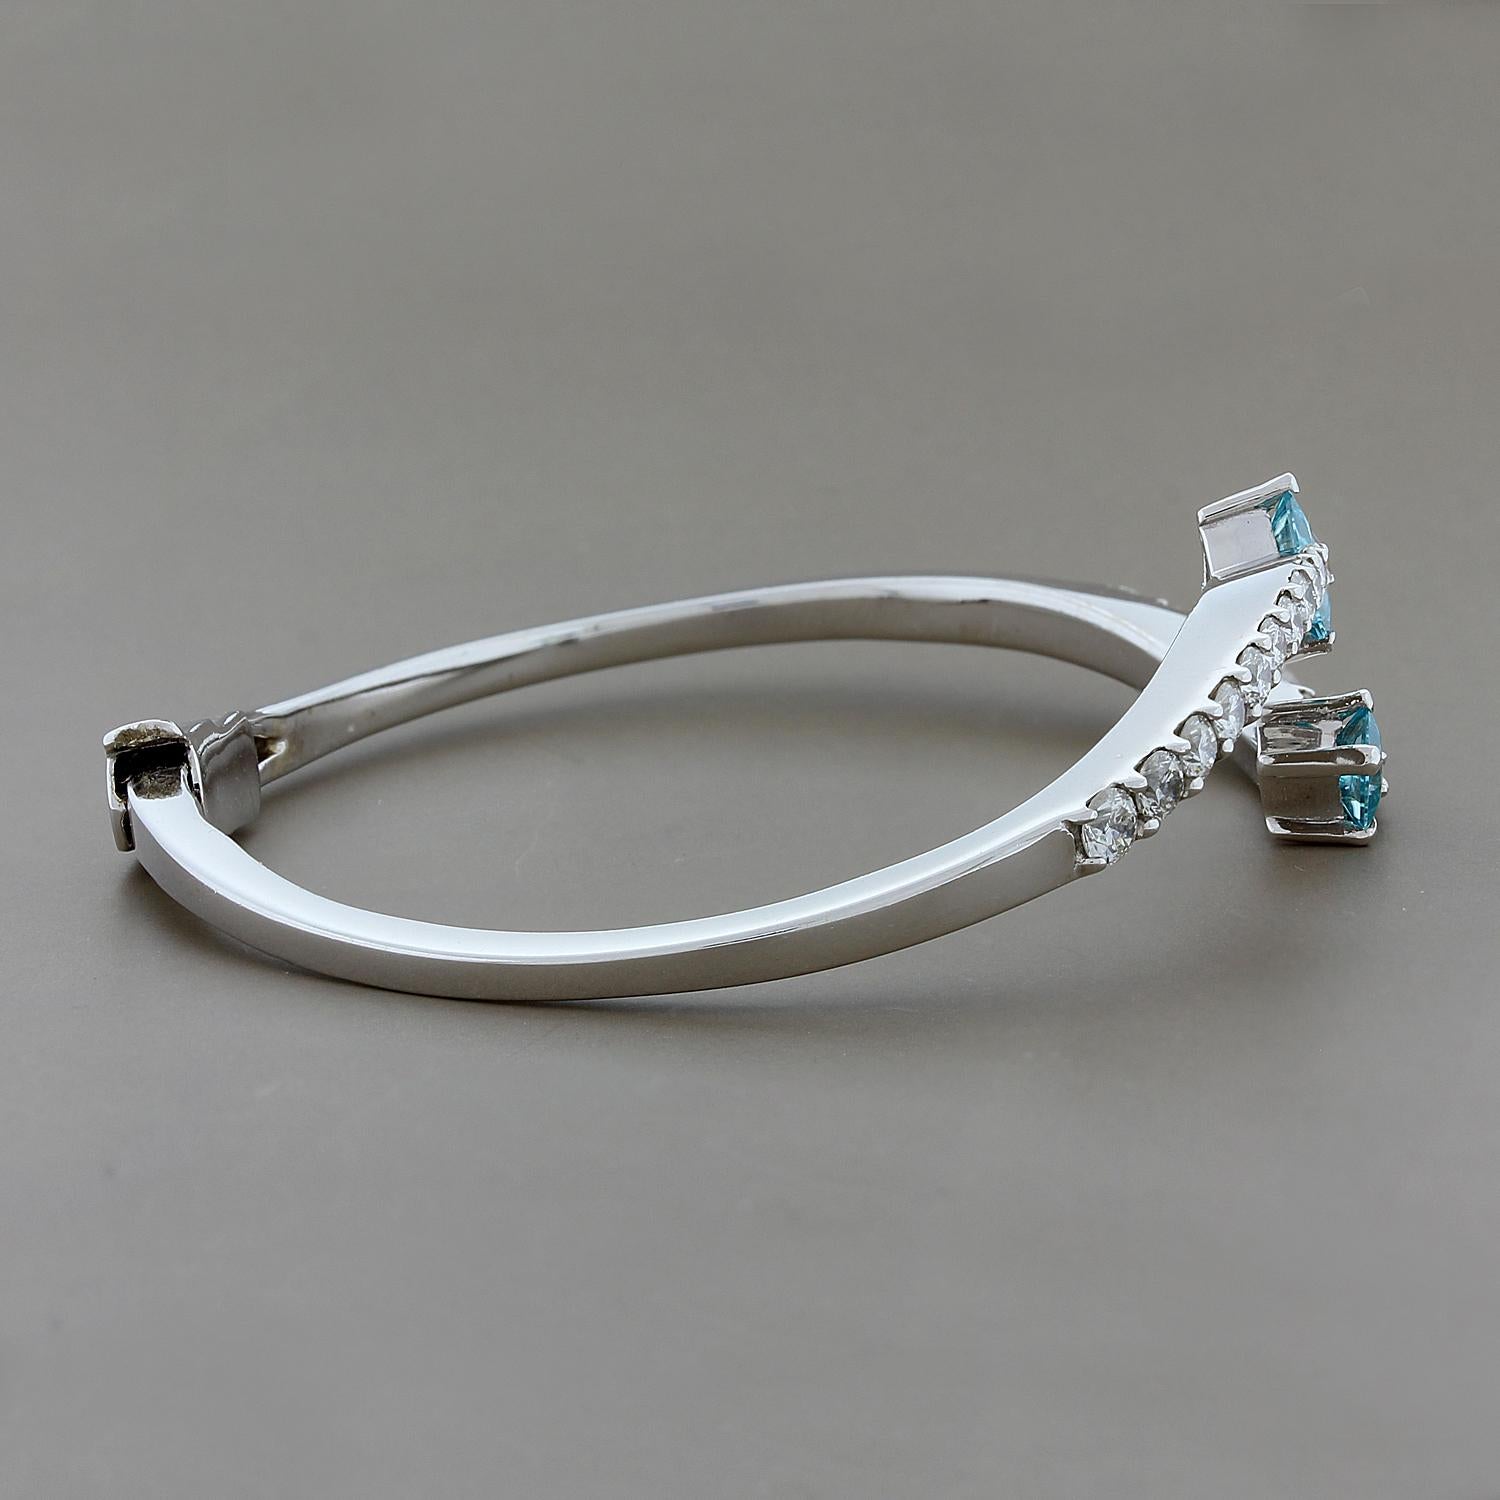 Shooting Star! This cuff features 1.49 carats of blue zircon. The two princess cut blue zircons are followed by 1.83 carats of round cut diamonds. The cuff has a safety latch for added security. Set in 14K white gold.

Fits wrists up to 6.5 inches
